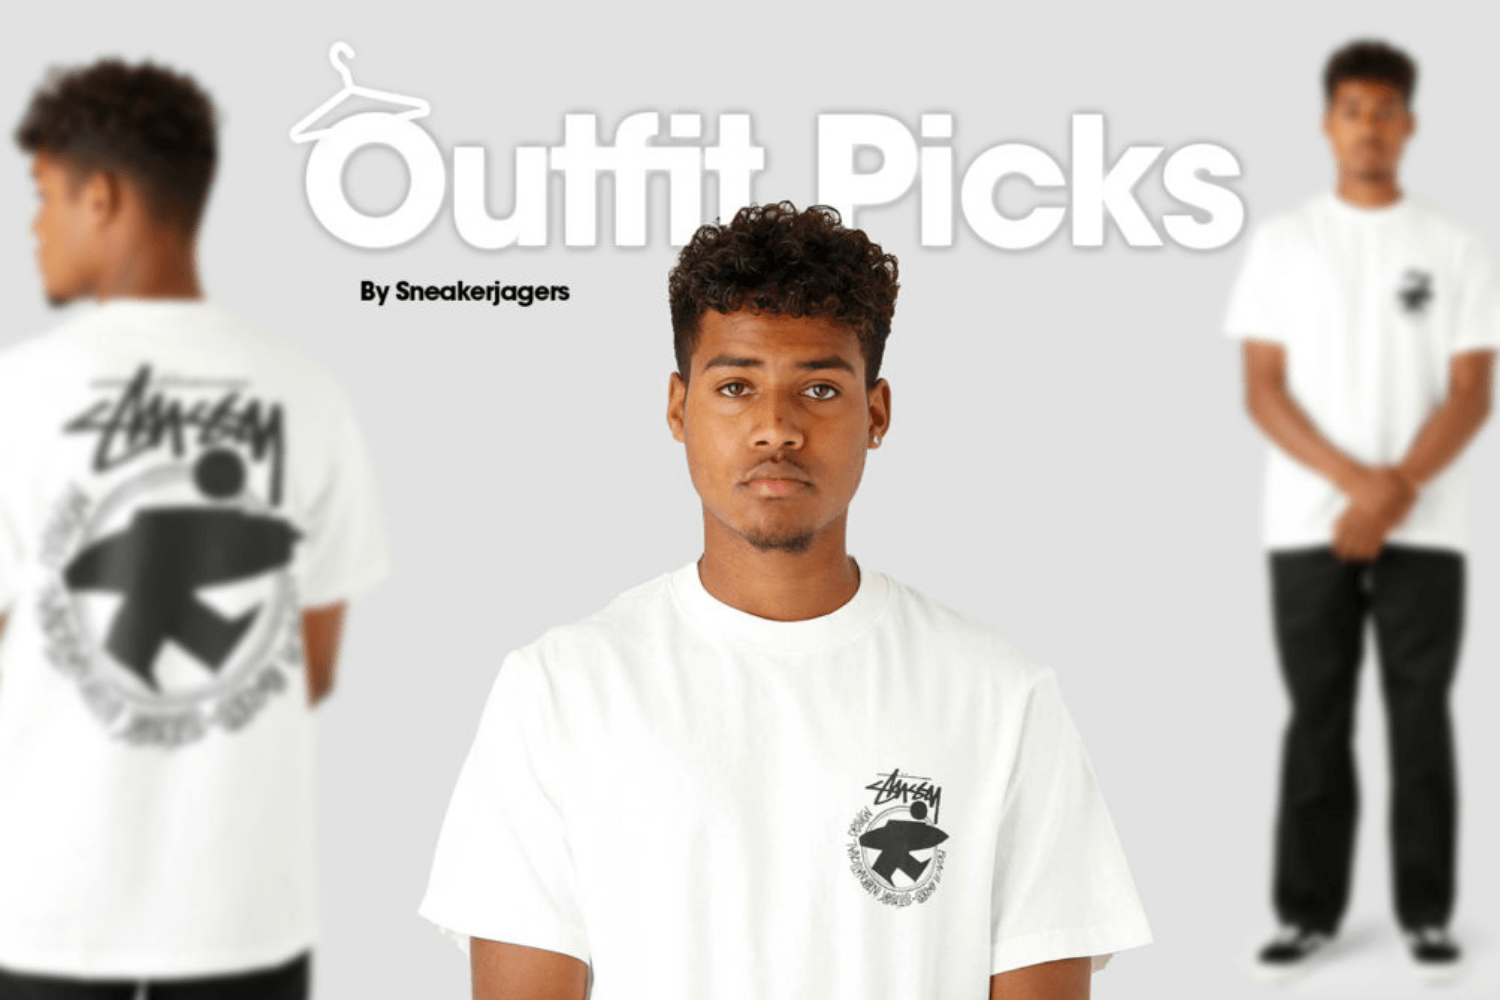 Outfit Picks by Sneakerjagers - Woche 26